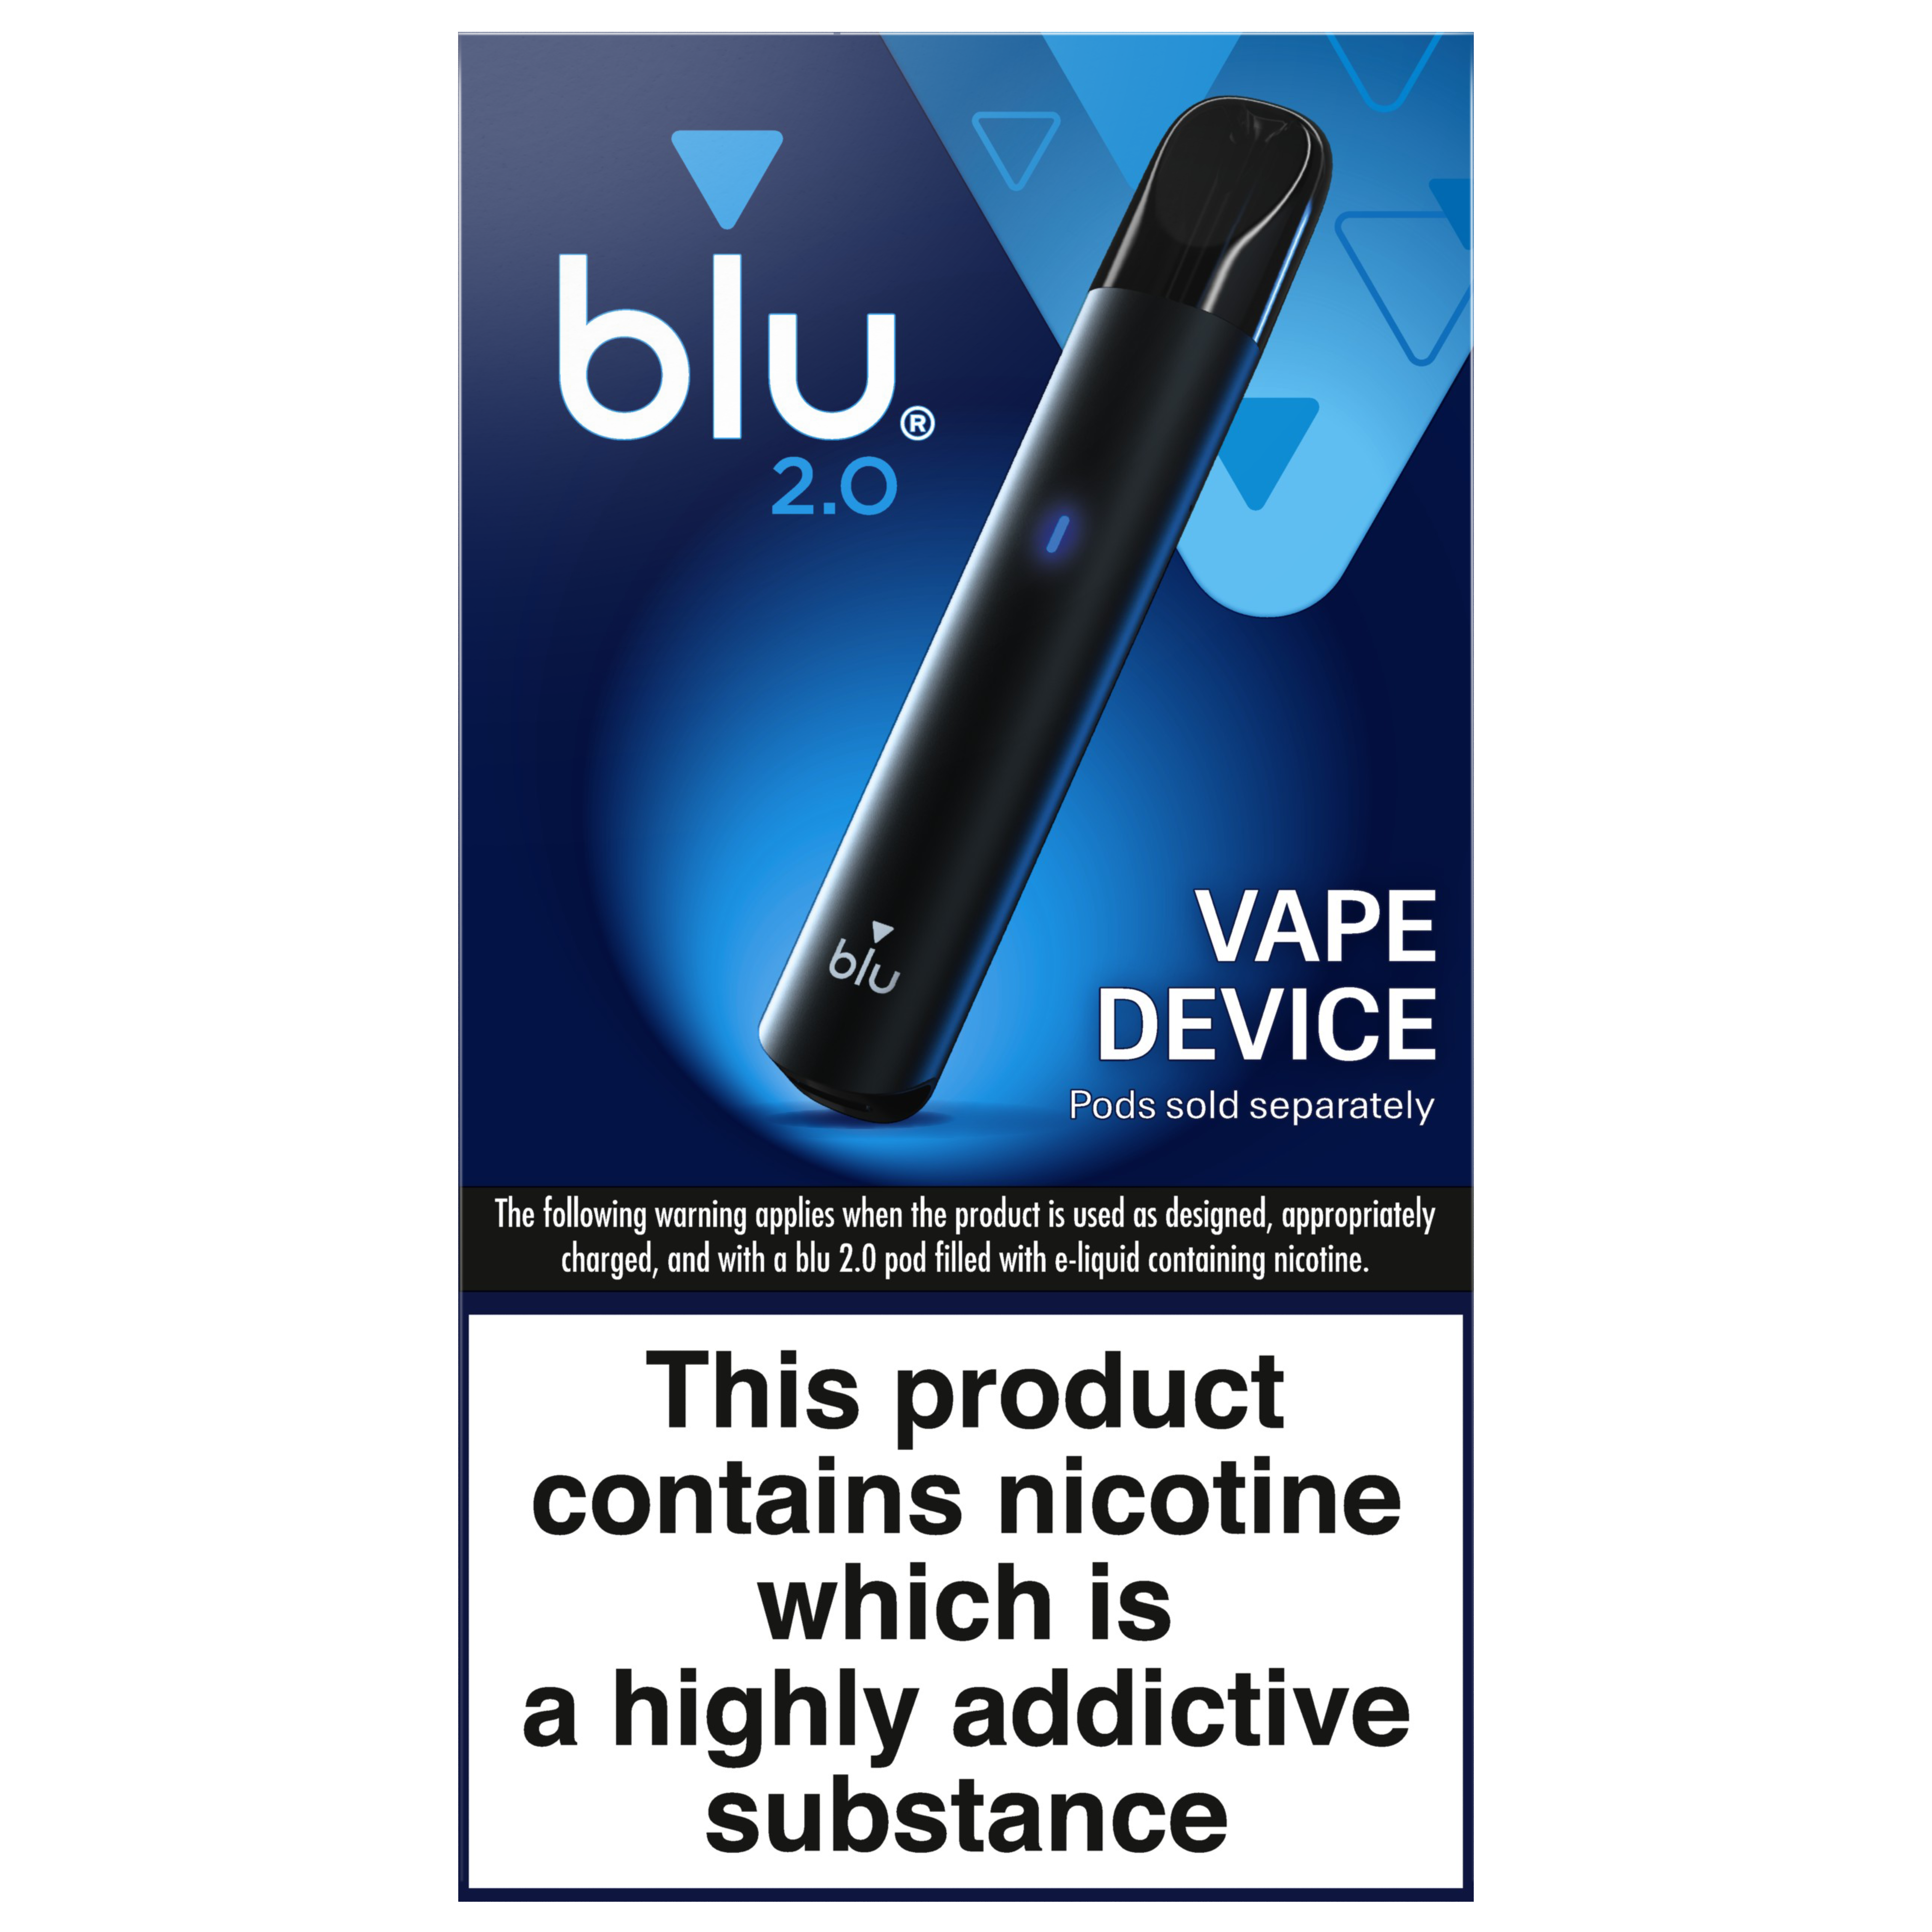 Imperial expands popular blu bar vape range with four new flavours